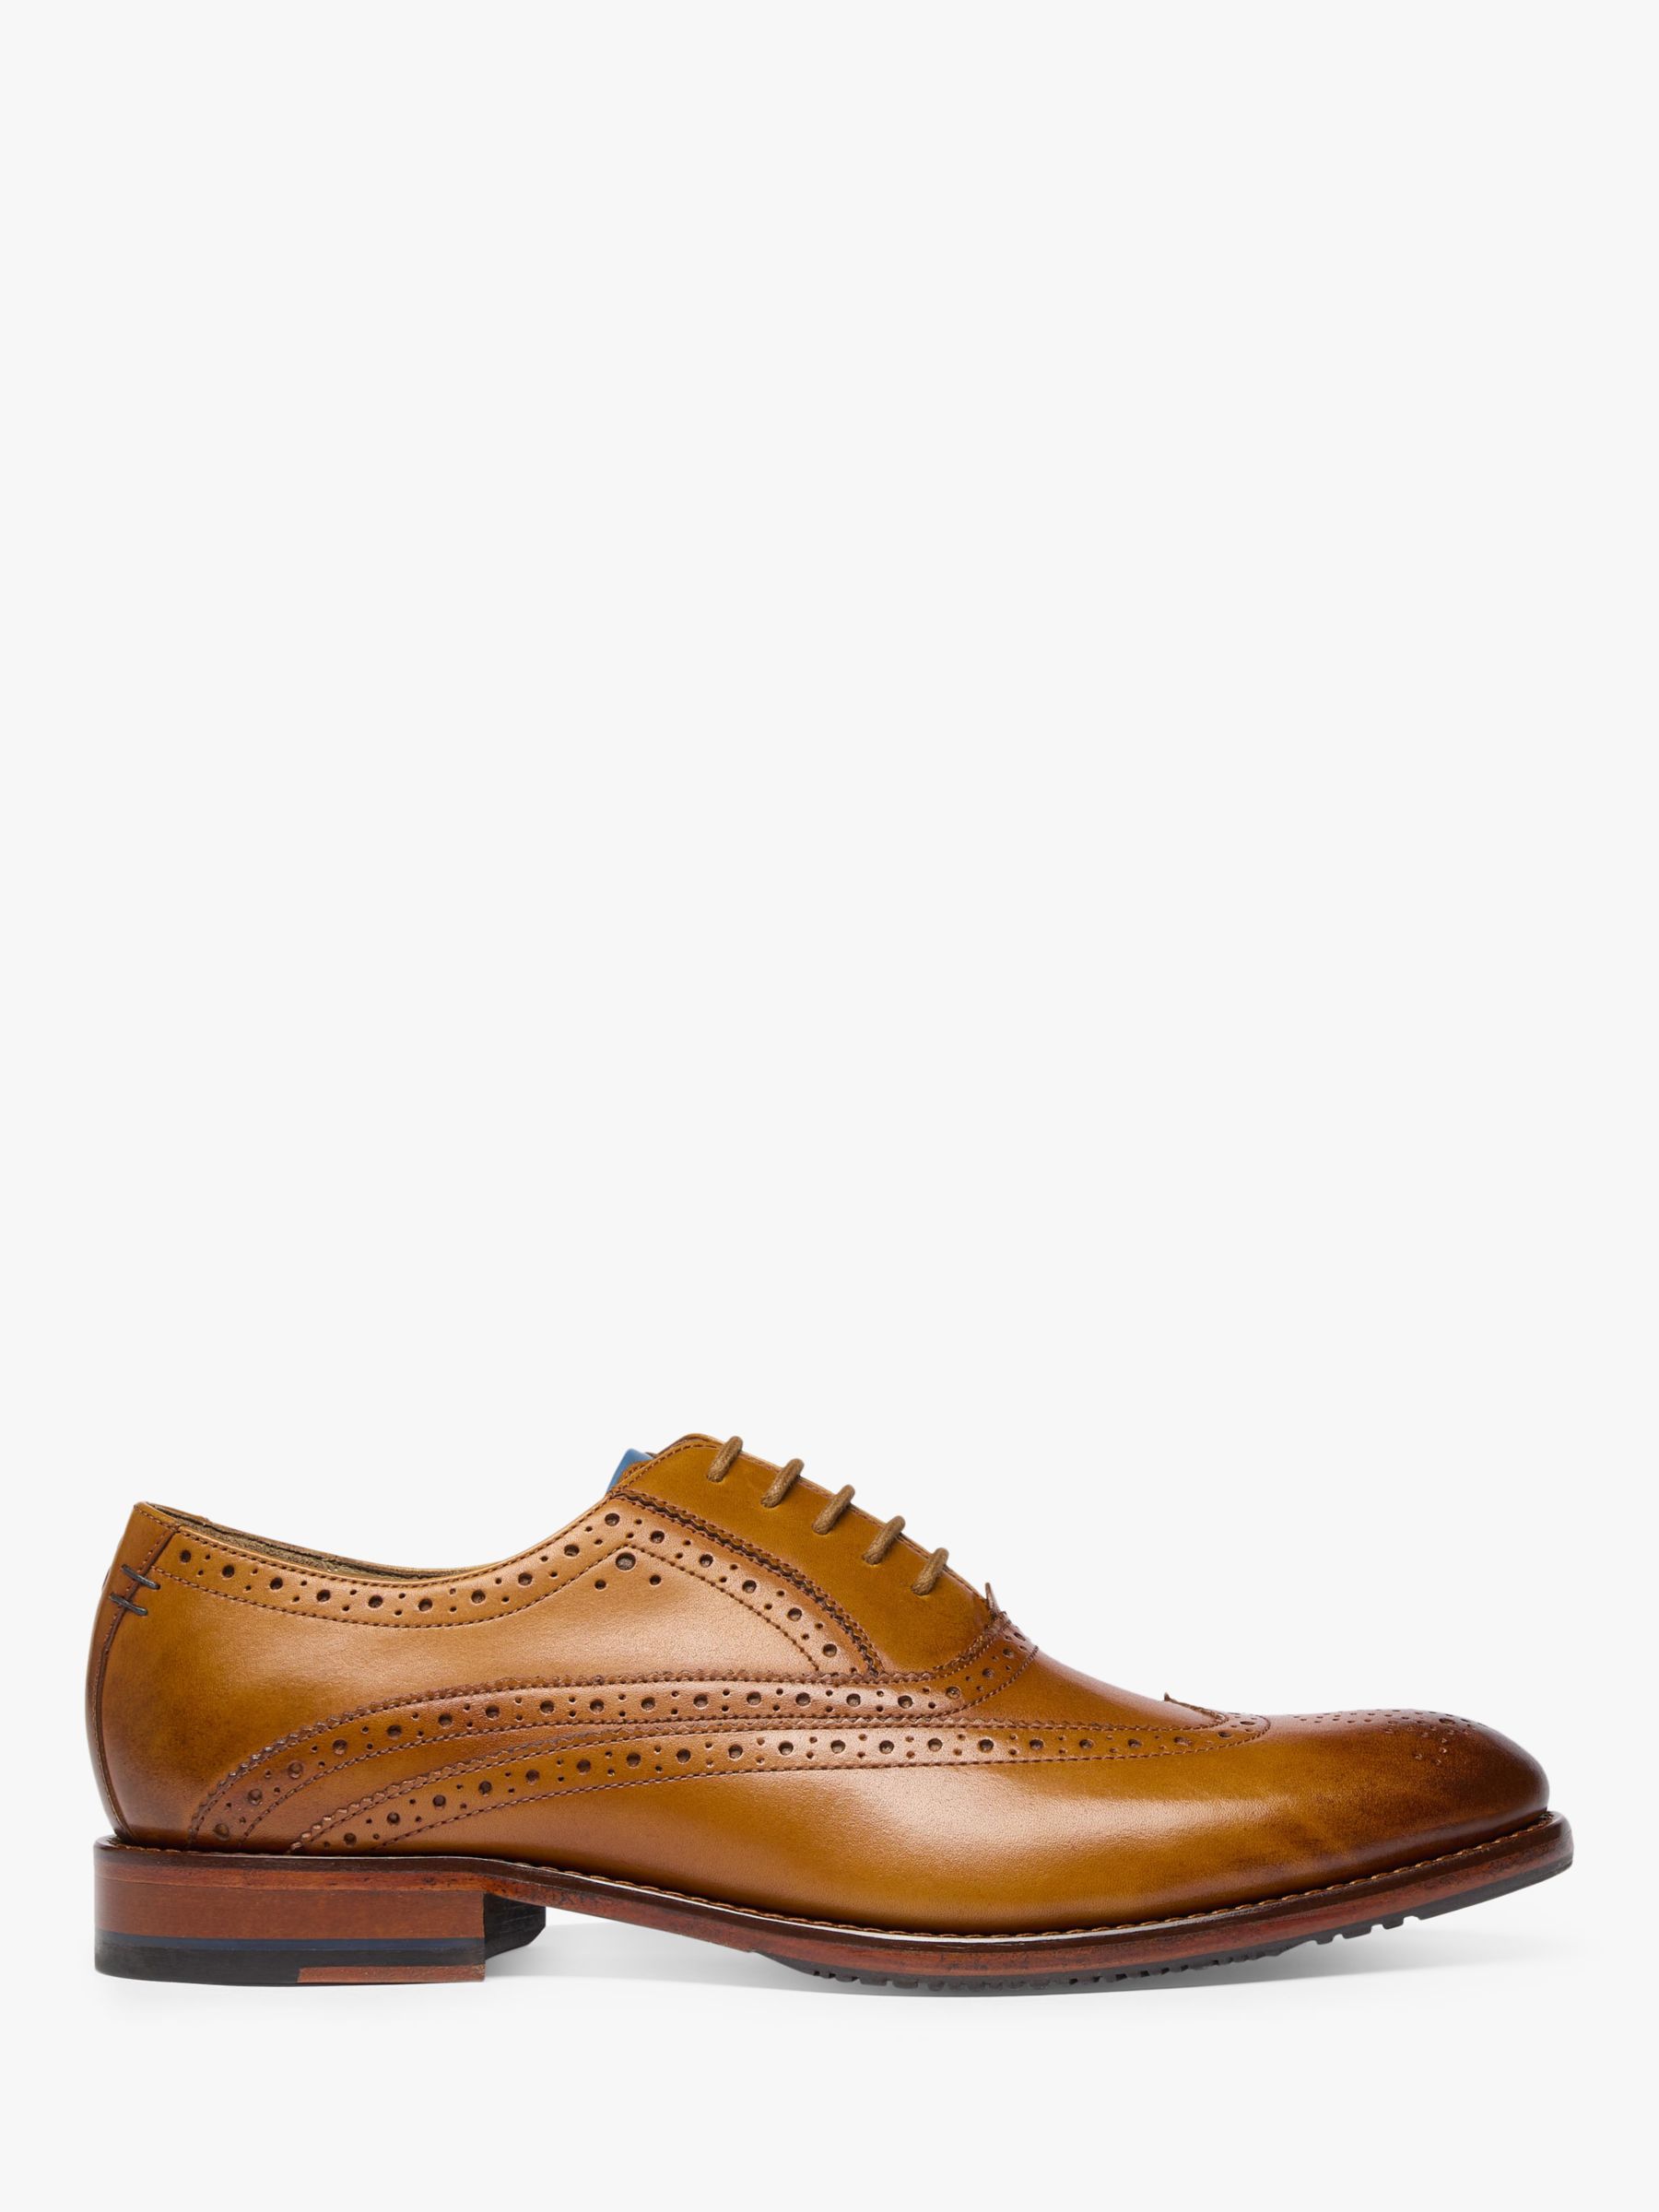 Oliver Sweeney Ledwell Leather Brogues, Light Tan at John Lewis & Partners